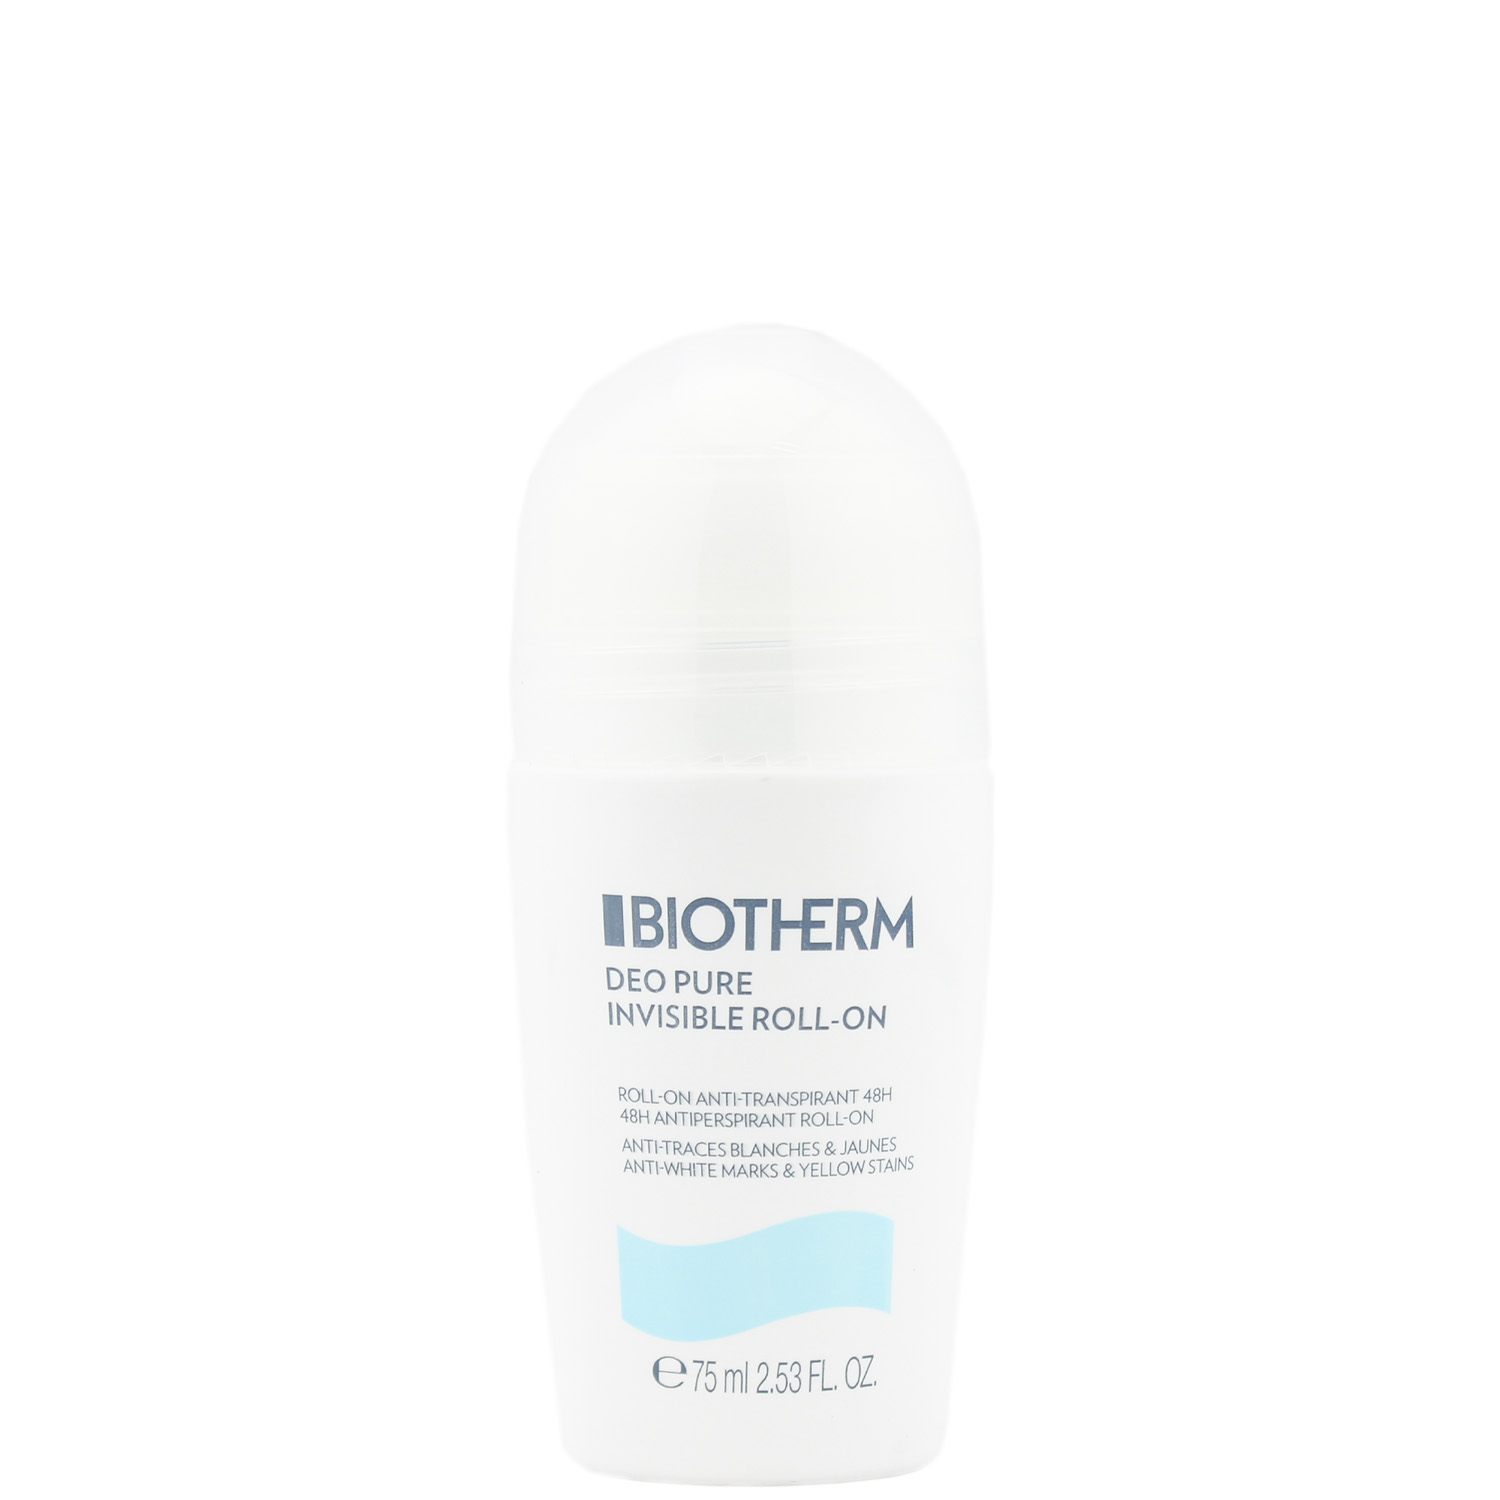 Biotherm Deo Pure Invisible Deodorant Roll-On 75ml